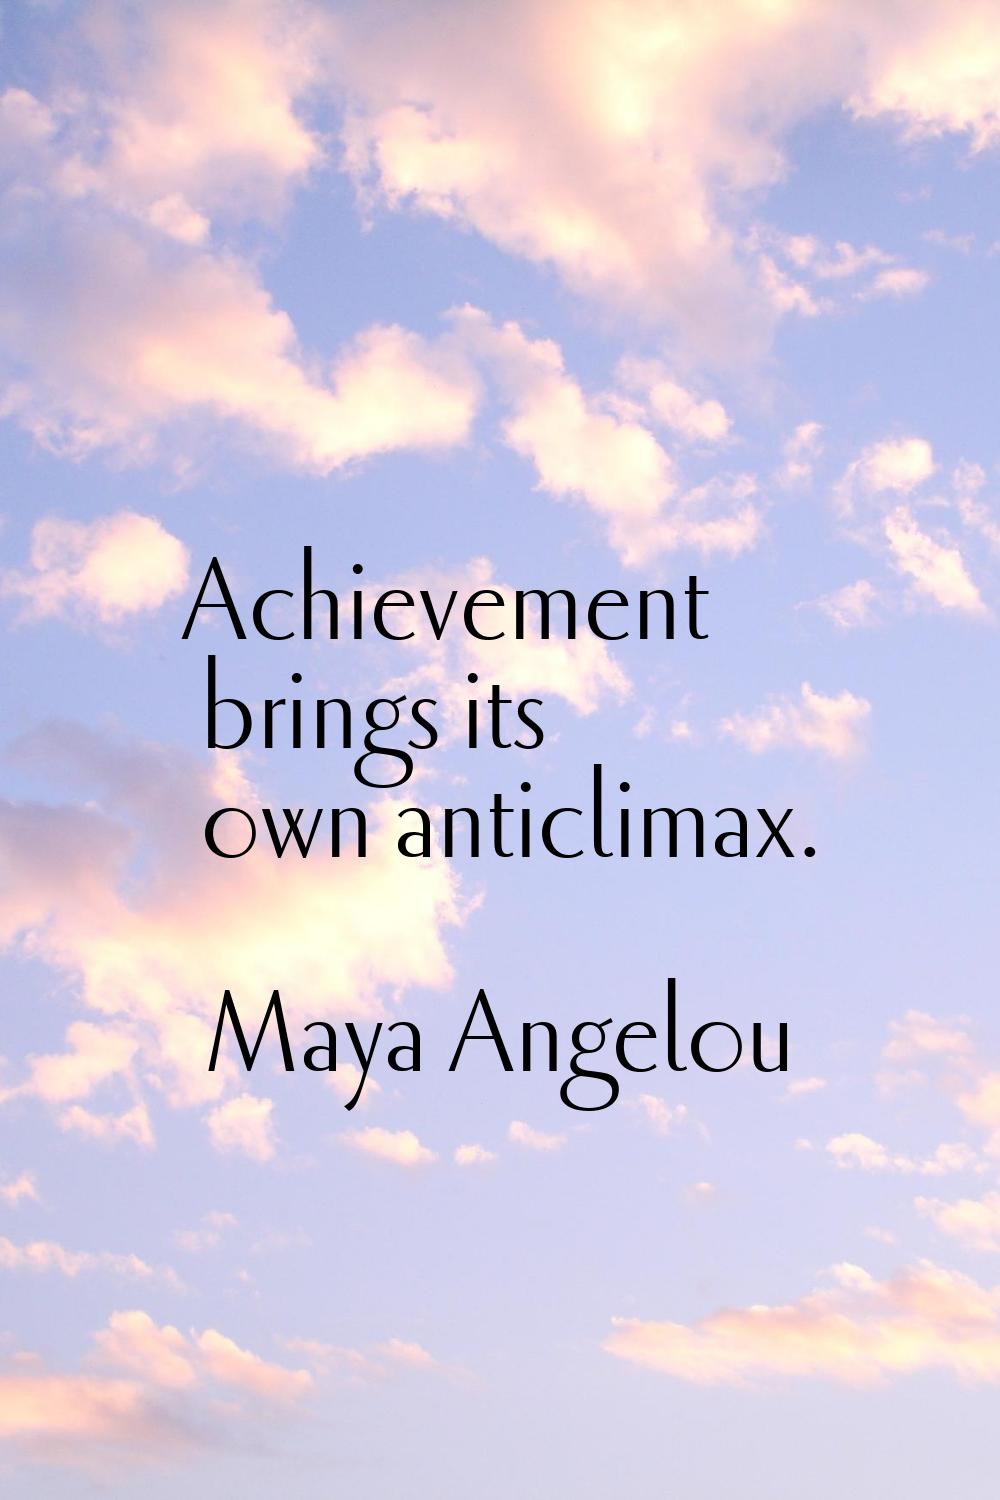 Achievement brings its own anticlimax.